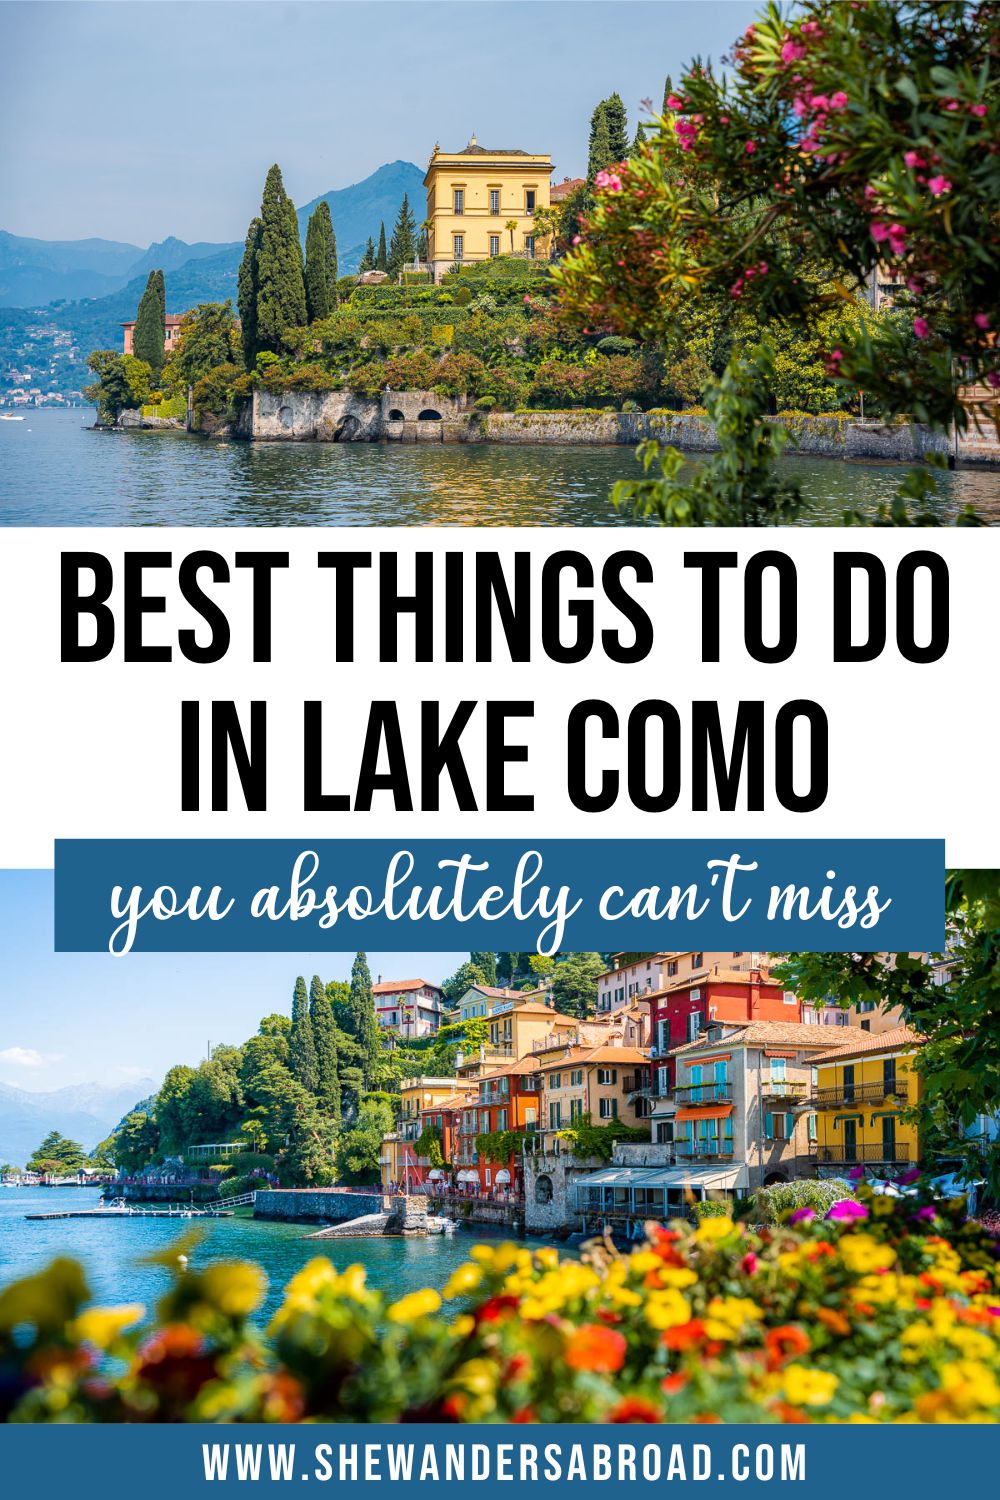 18 Absolute Best Things to Do in Lake Como, Italy